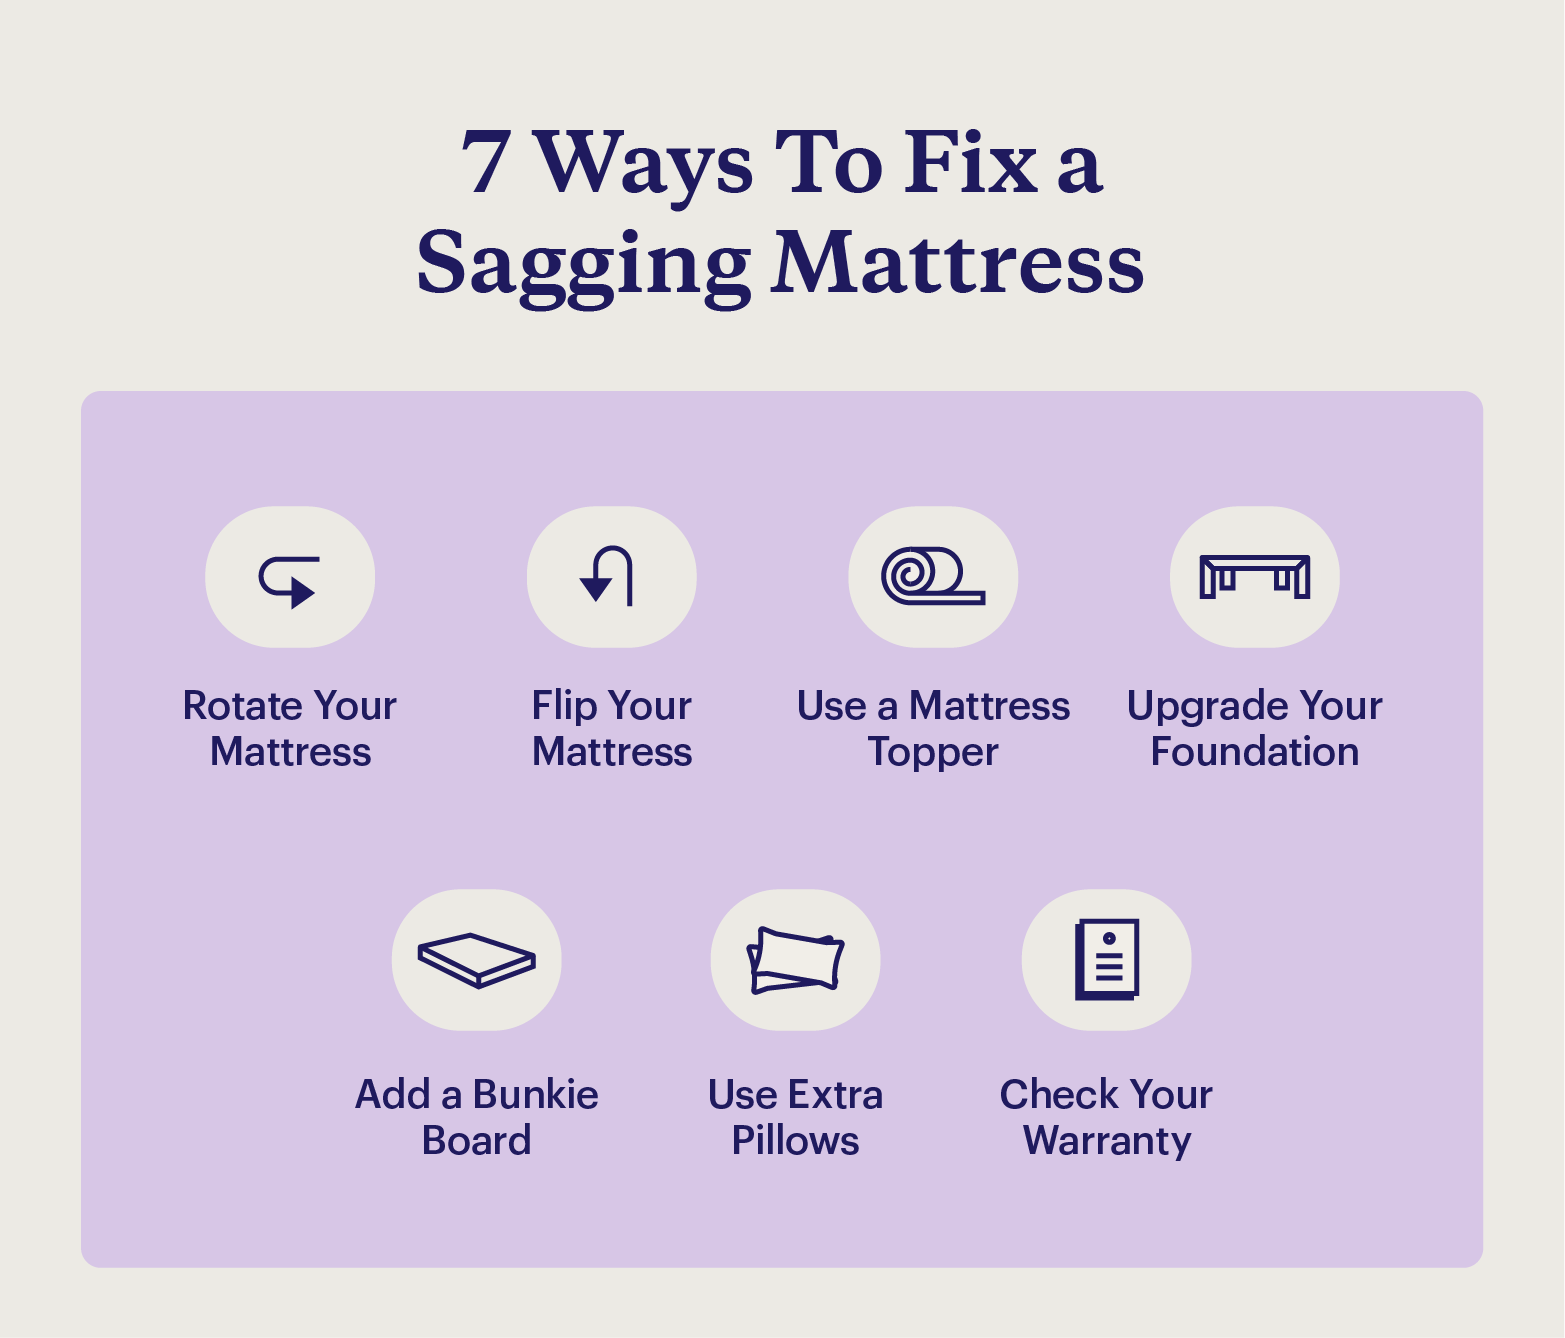 Graphic describing 7 ways to fix a sagging mattress with icons.